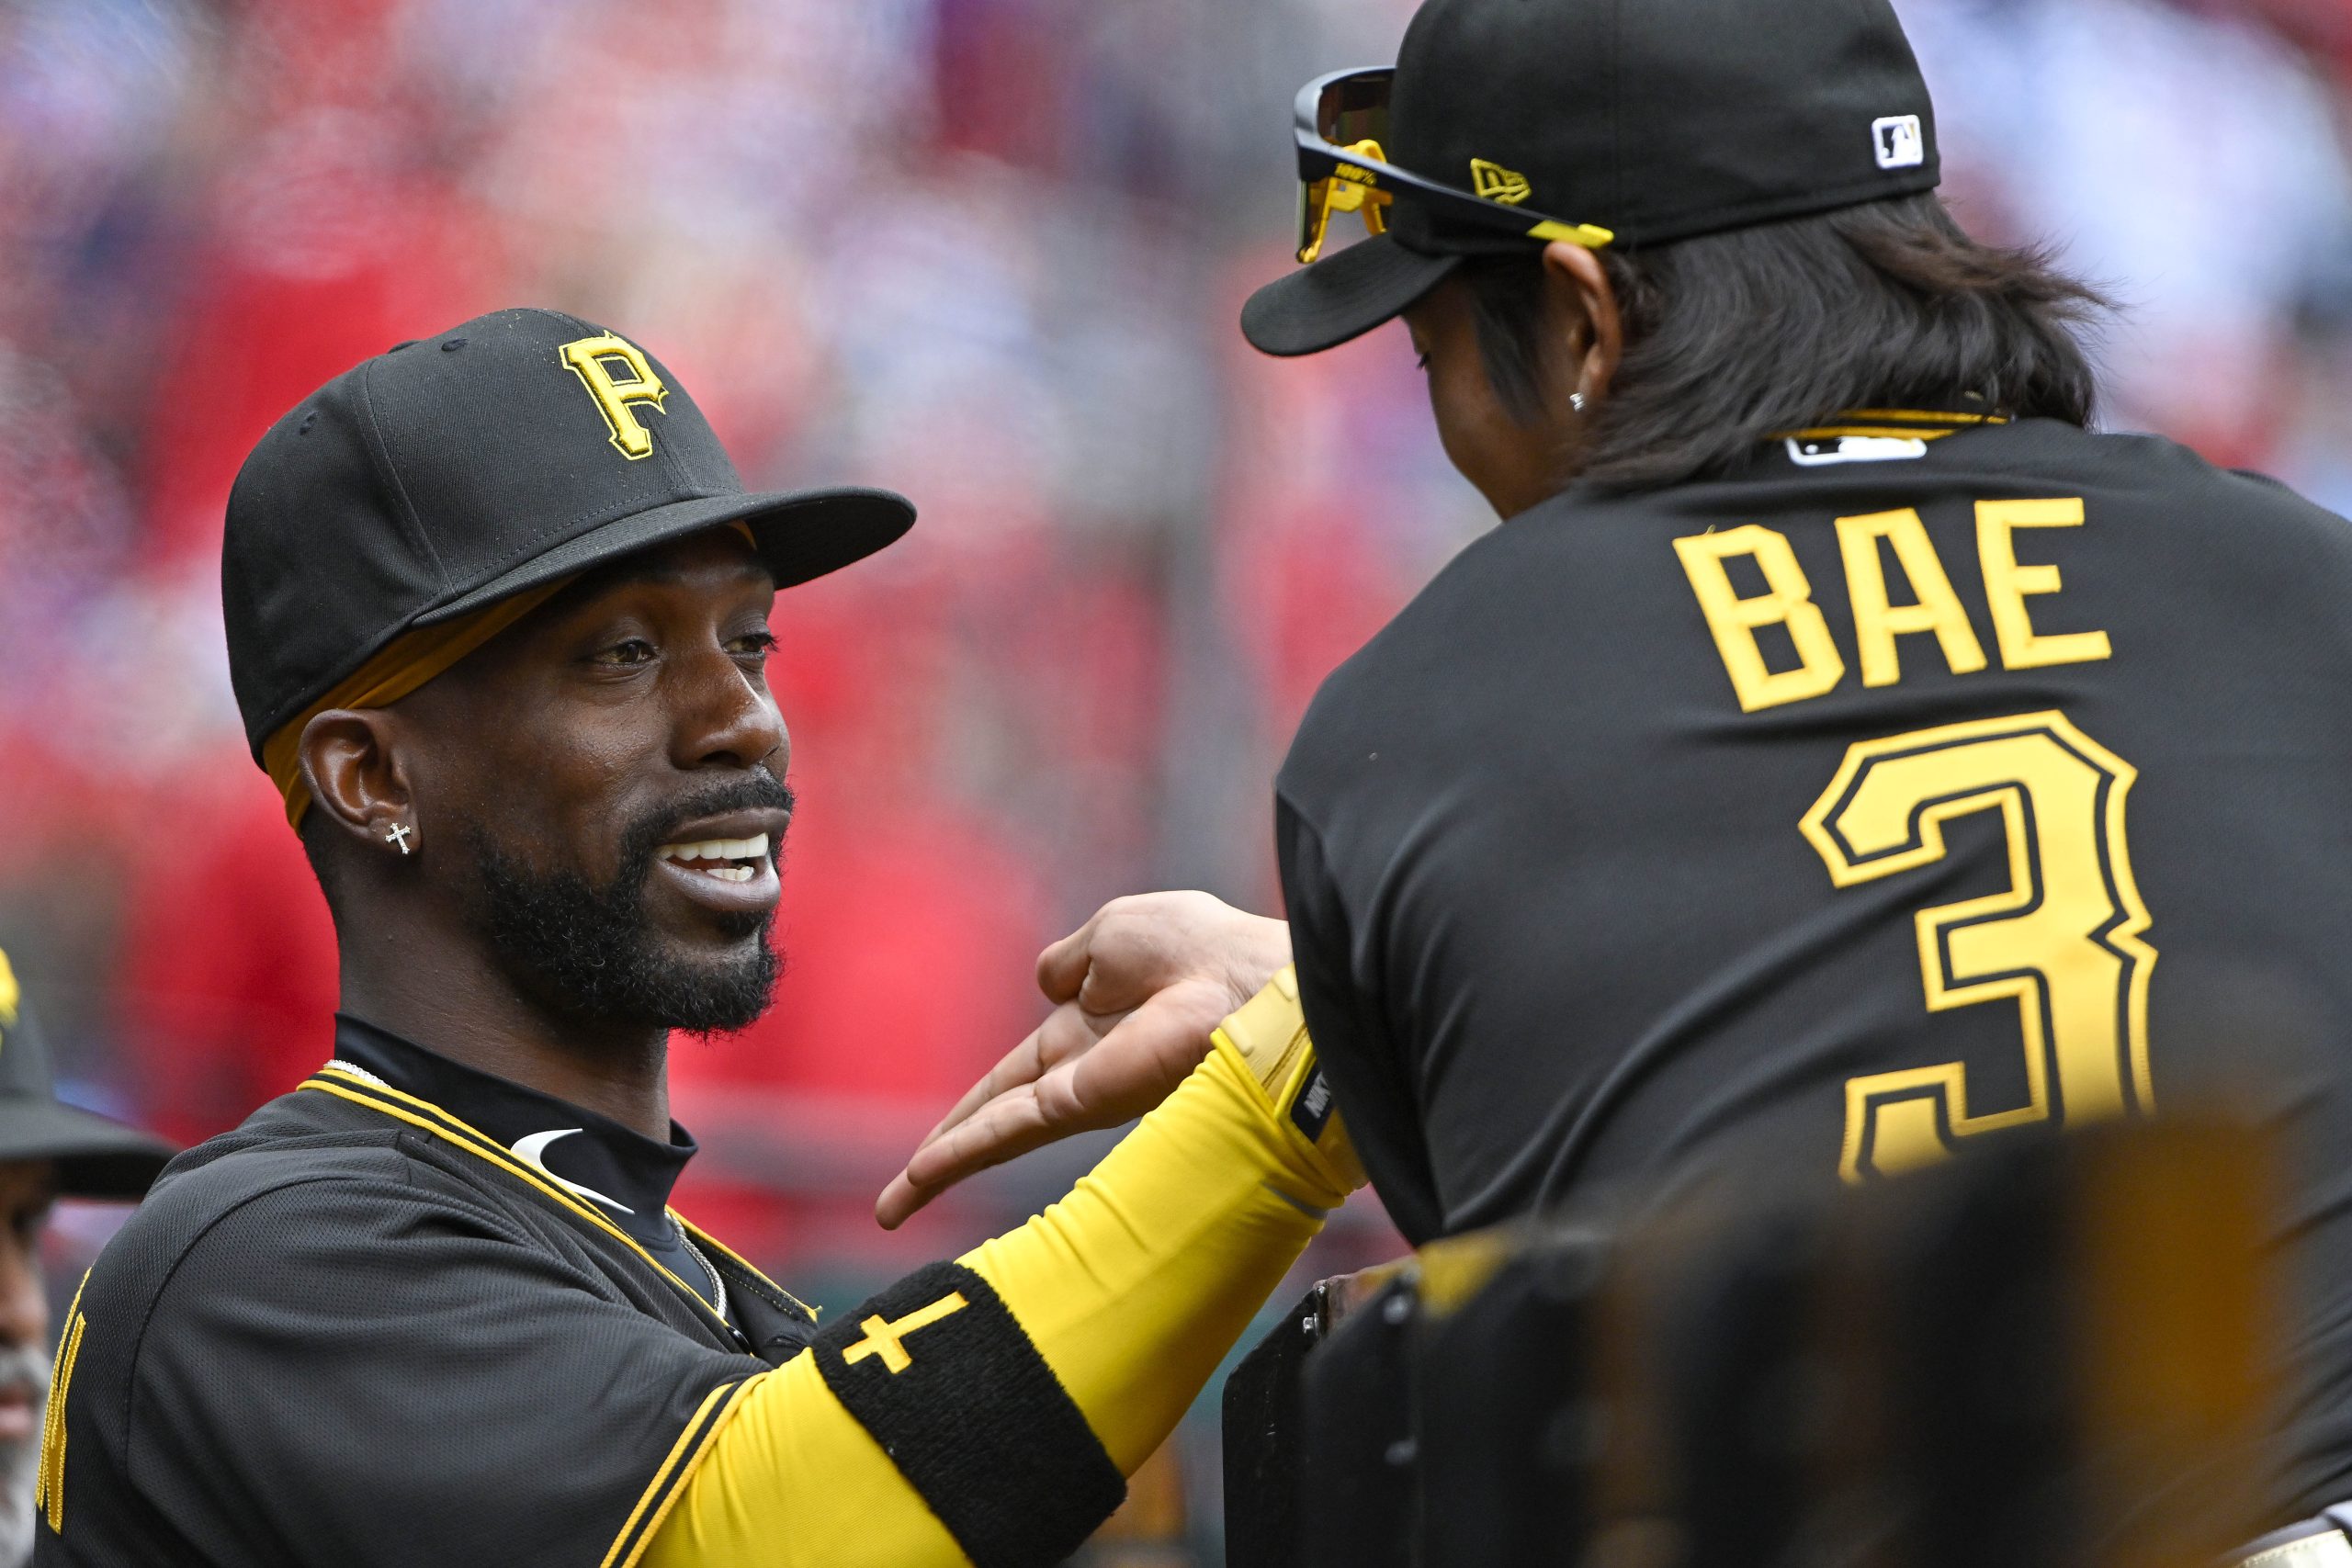 Pittsburgh Pirates players explain how they got their jersey numbers